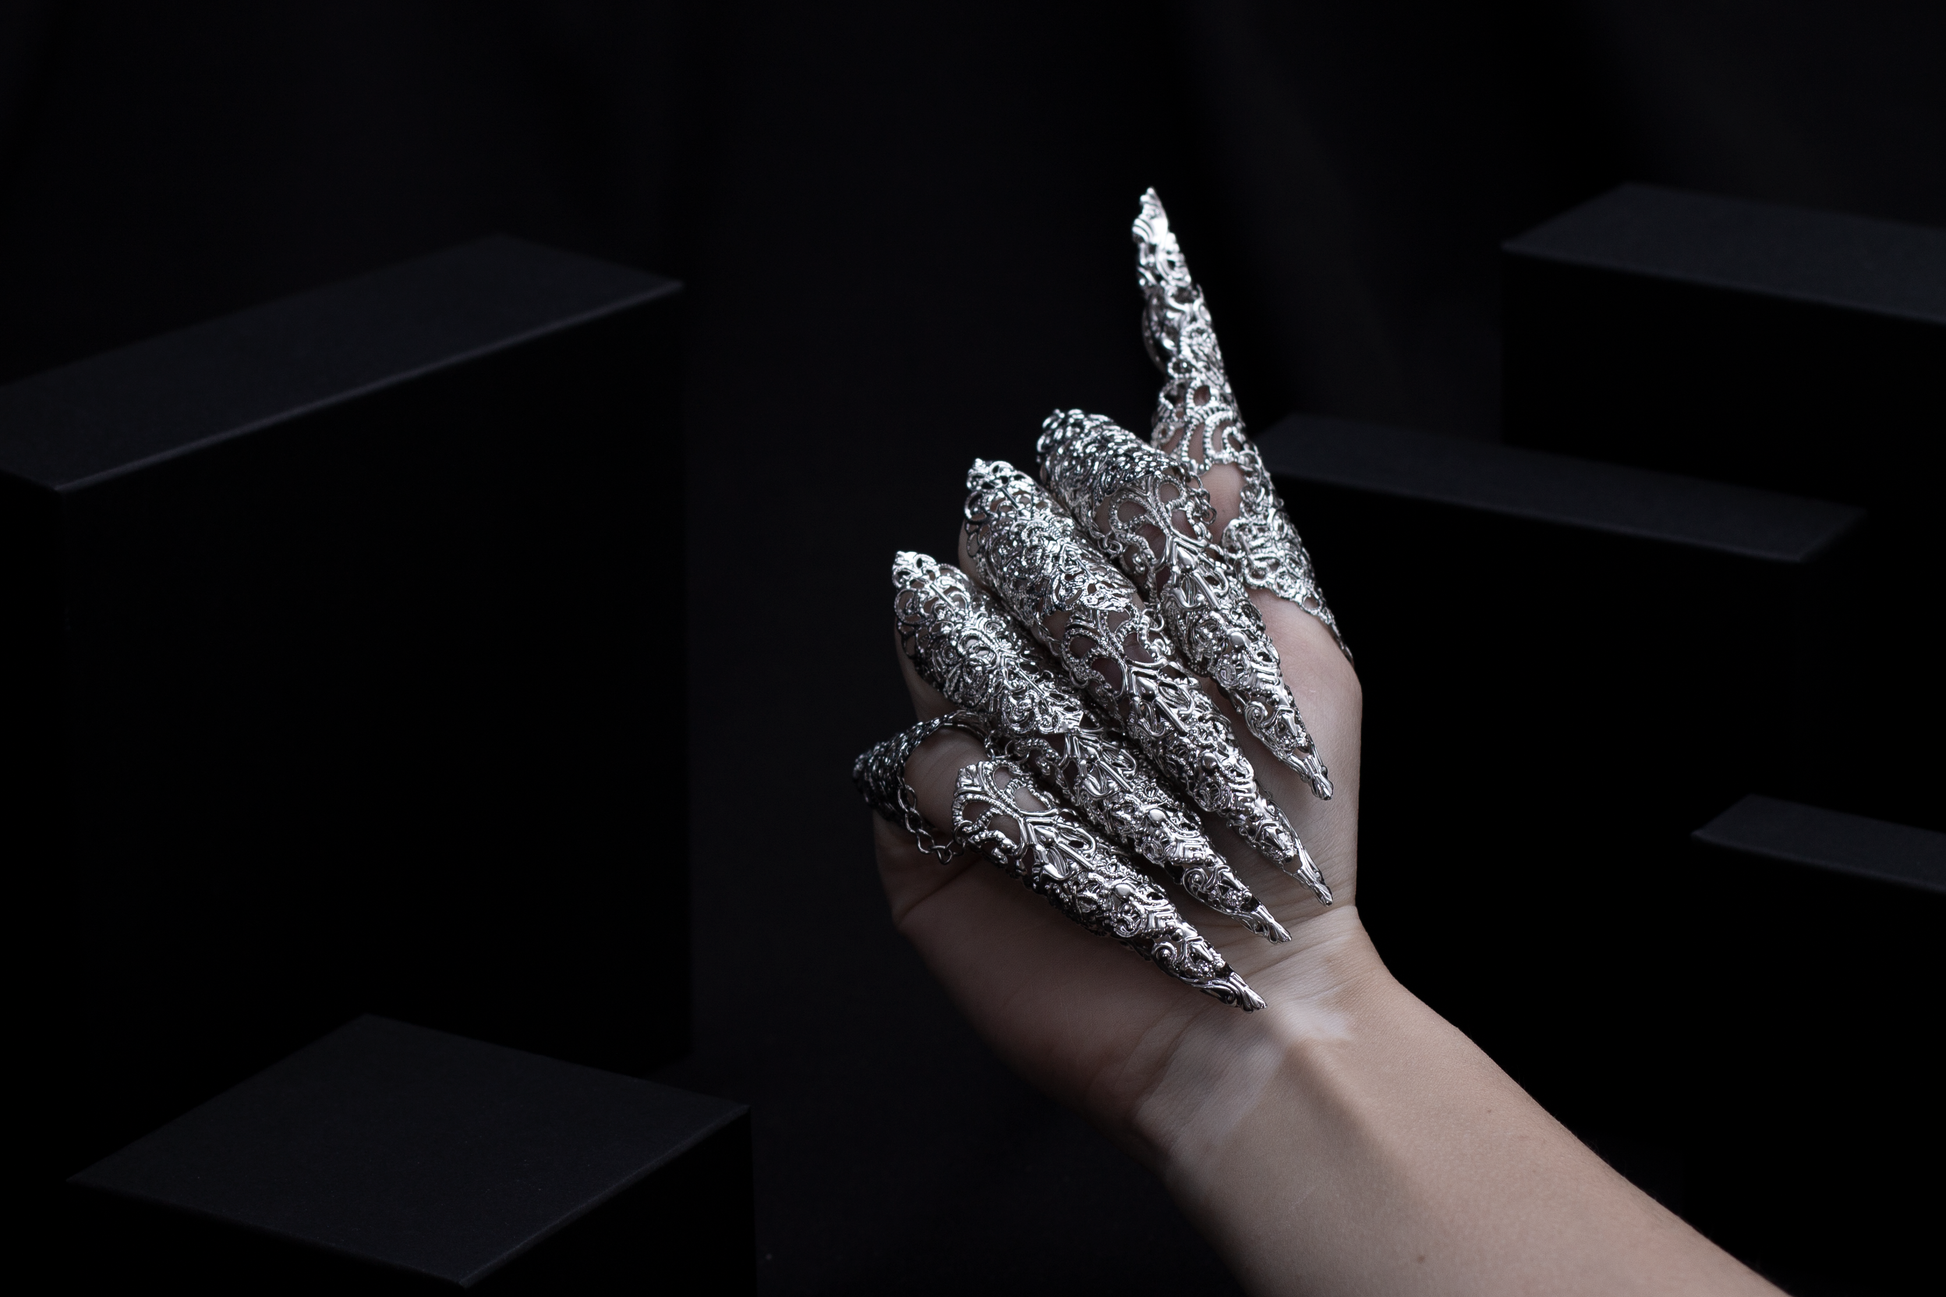 A hand emerges from the shadows, adorned with Myril Jewels' midi rings featuring elongated claws, capturing the essence of neo-gothic luxury. These finely crafted rings are a statement of dark avant-garde artistry, ideal for those who revel in gothic-chic and bold jewelry aesthetics.